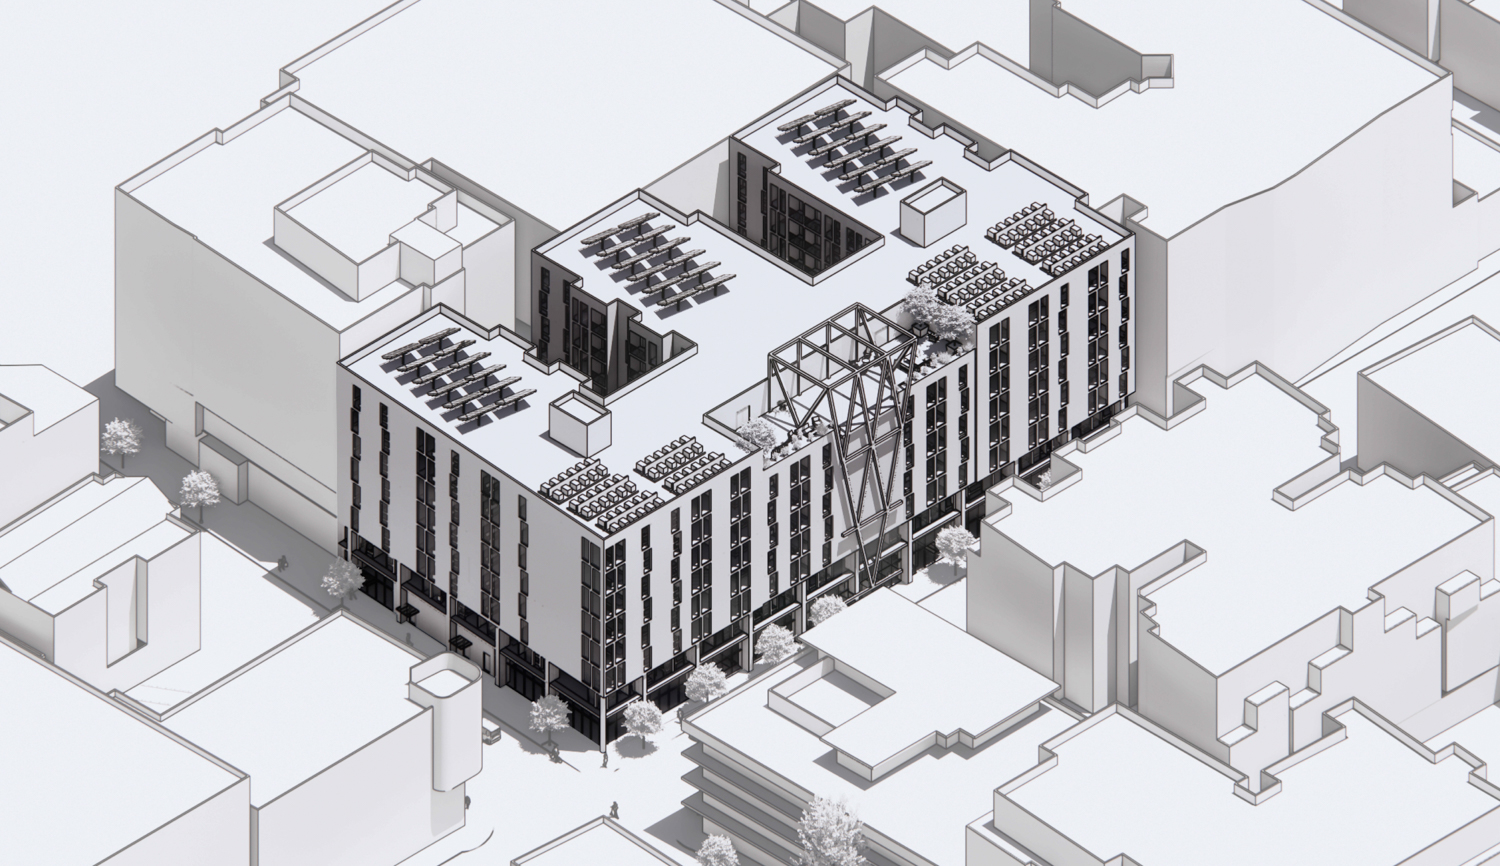 2100 Milvia Street aerial view, illustration by Kava Massih Architects